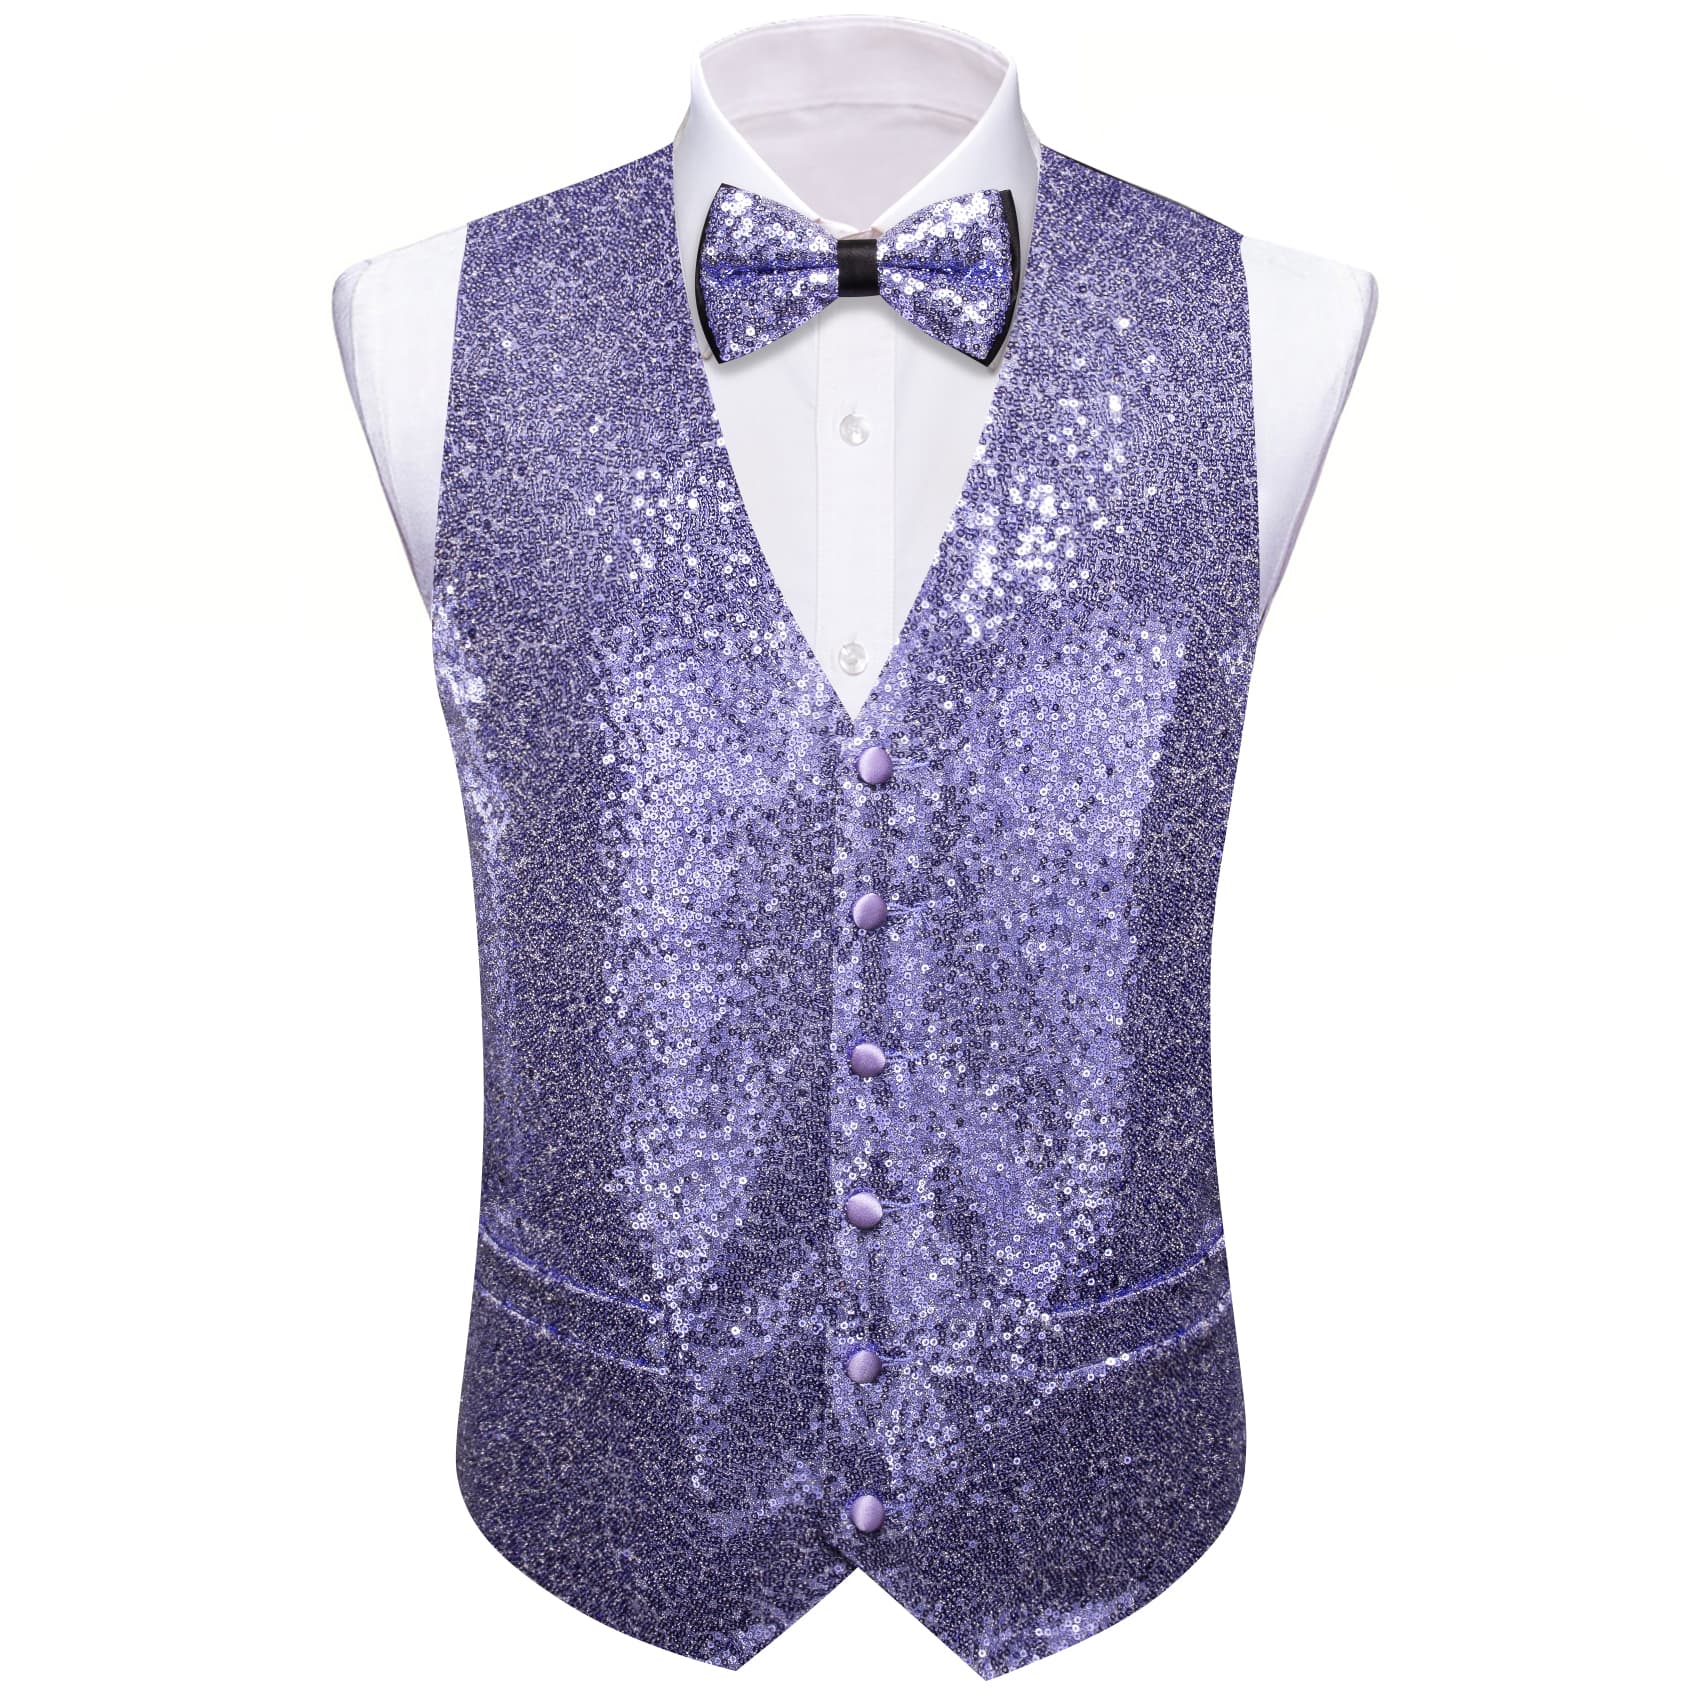 Light  purple waistcoat with bowtie and white solid dress shirt long sleeve